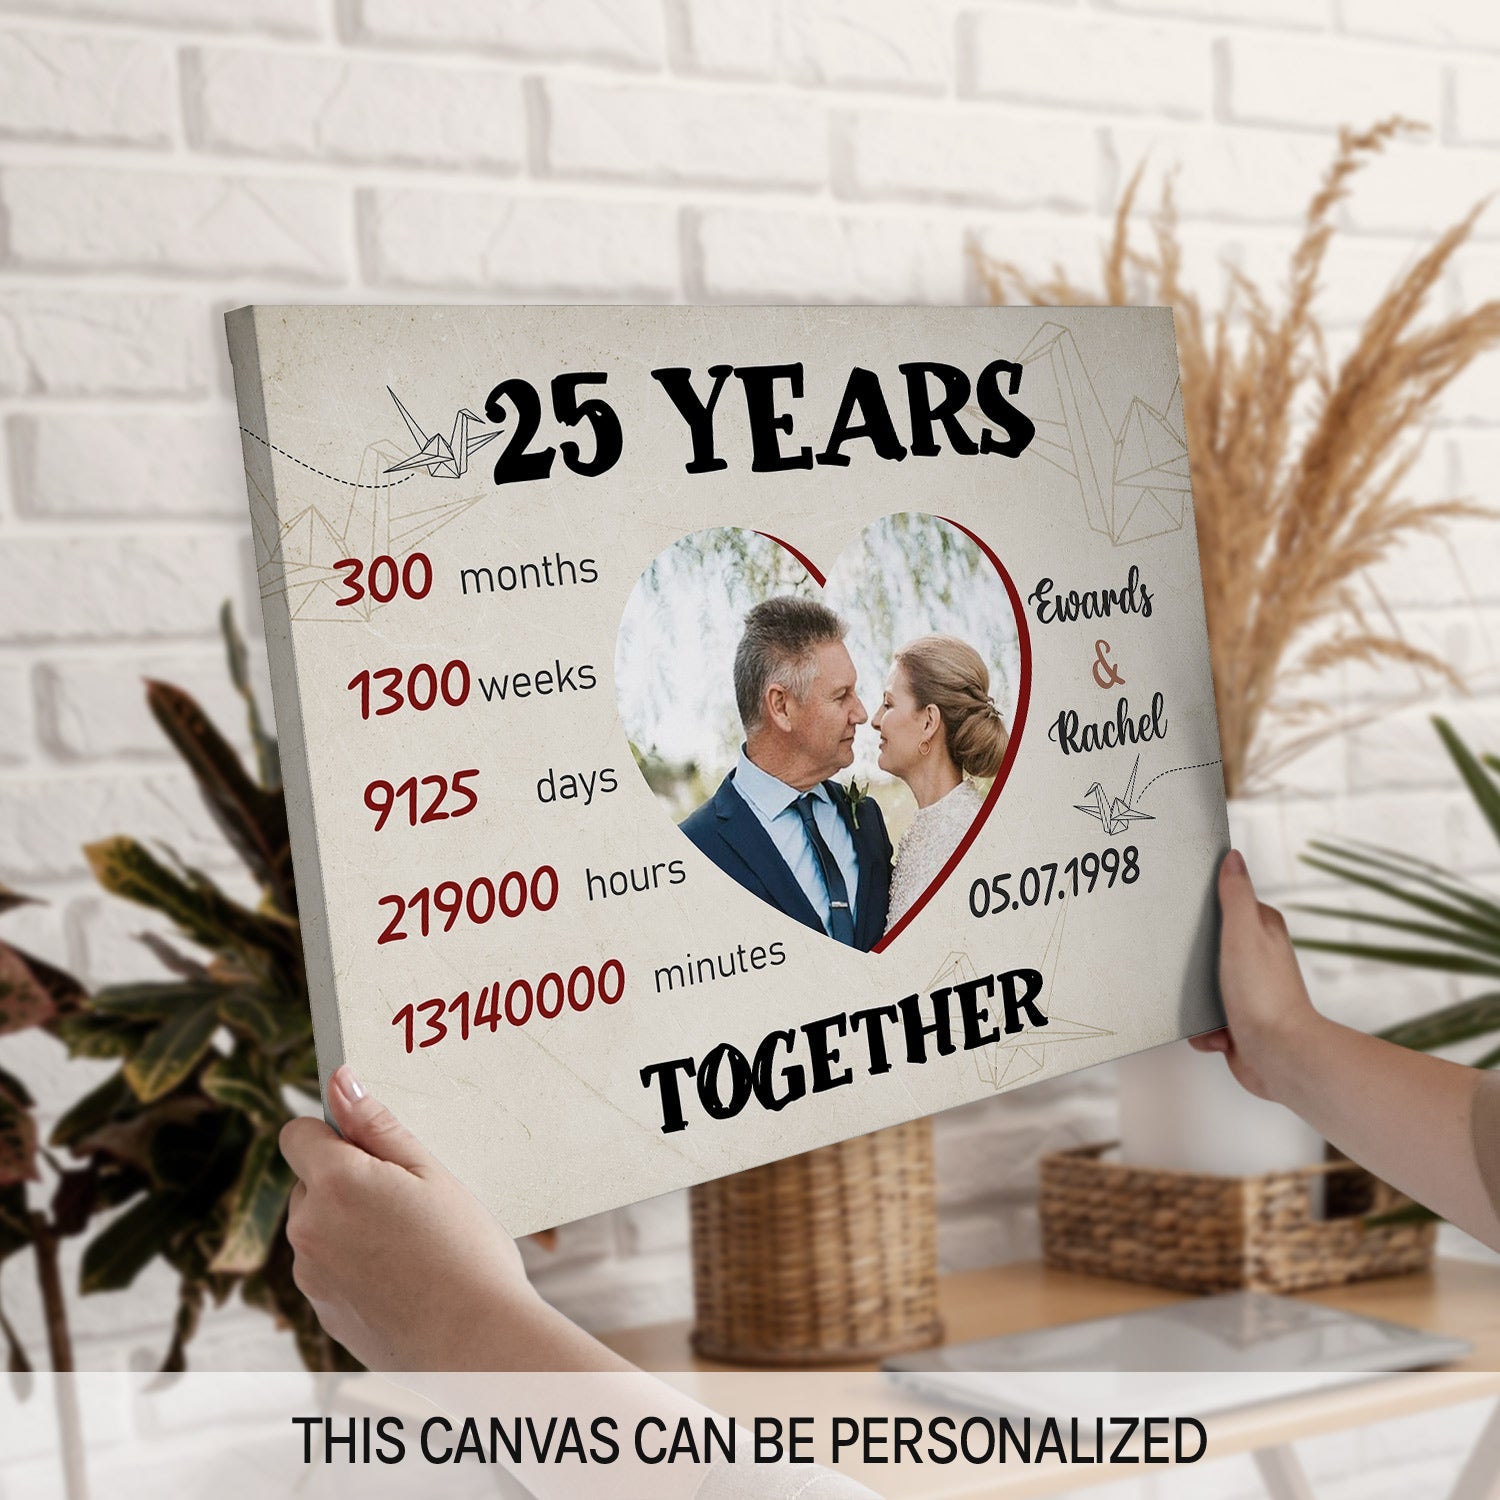 Personalized Picture Frames 25th 25 Year Wedding Anniversary Gifts